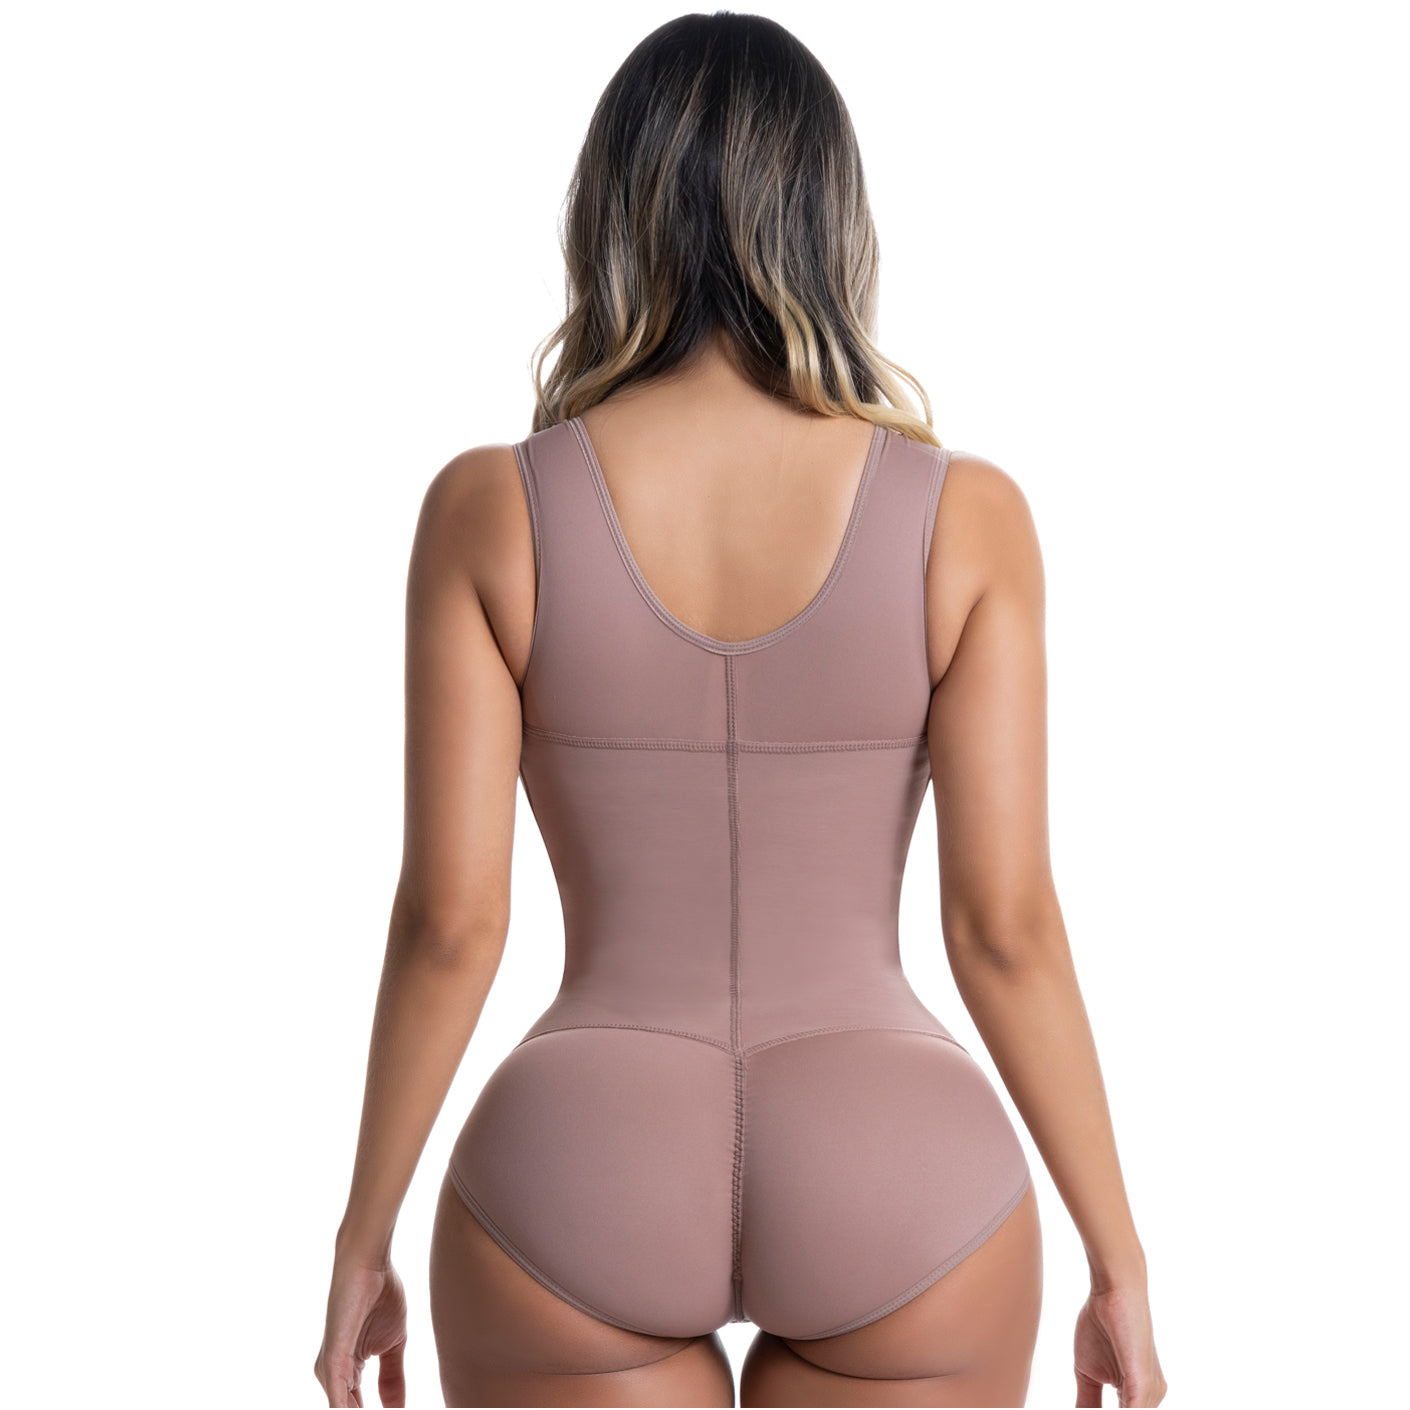 SONRYSE 047BF, Postpartum Post Surgery Compression Garment, Tummy Control  Butt Lifter Body Shaper, Daily Use Open Bust Shapewear